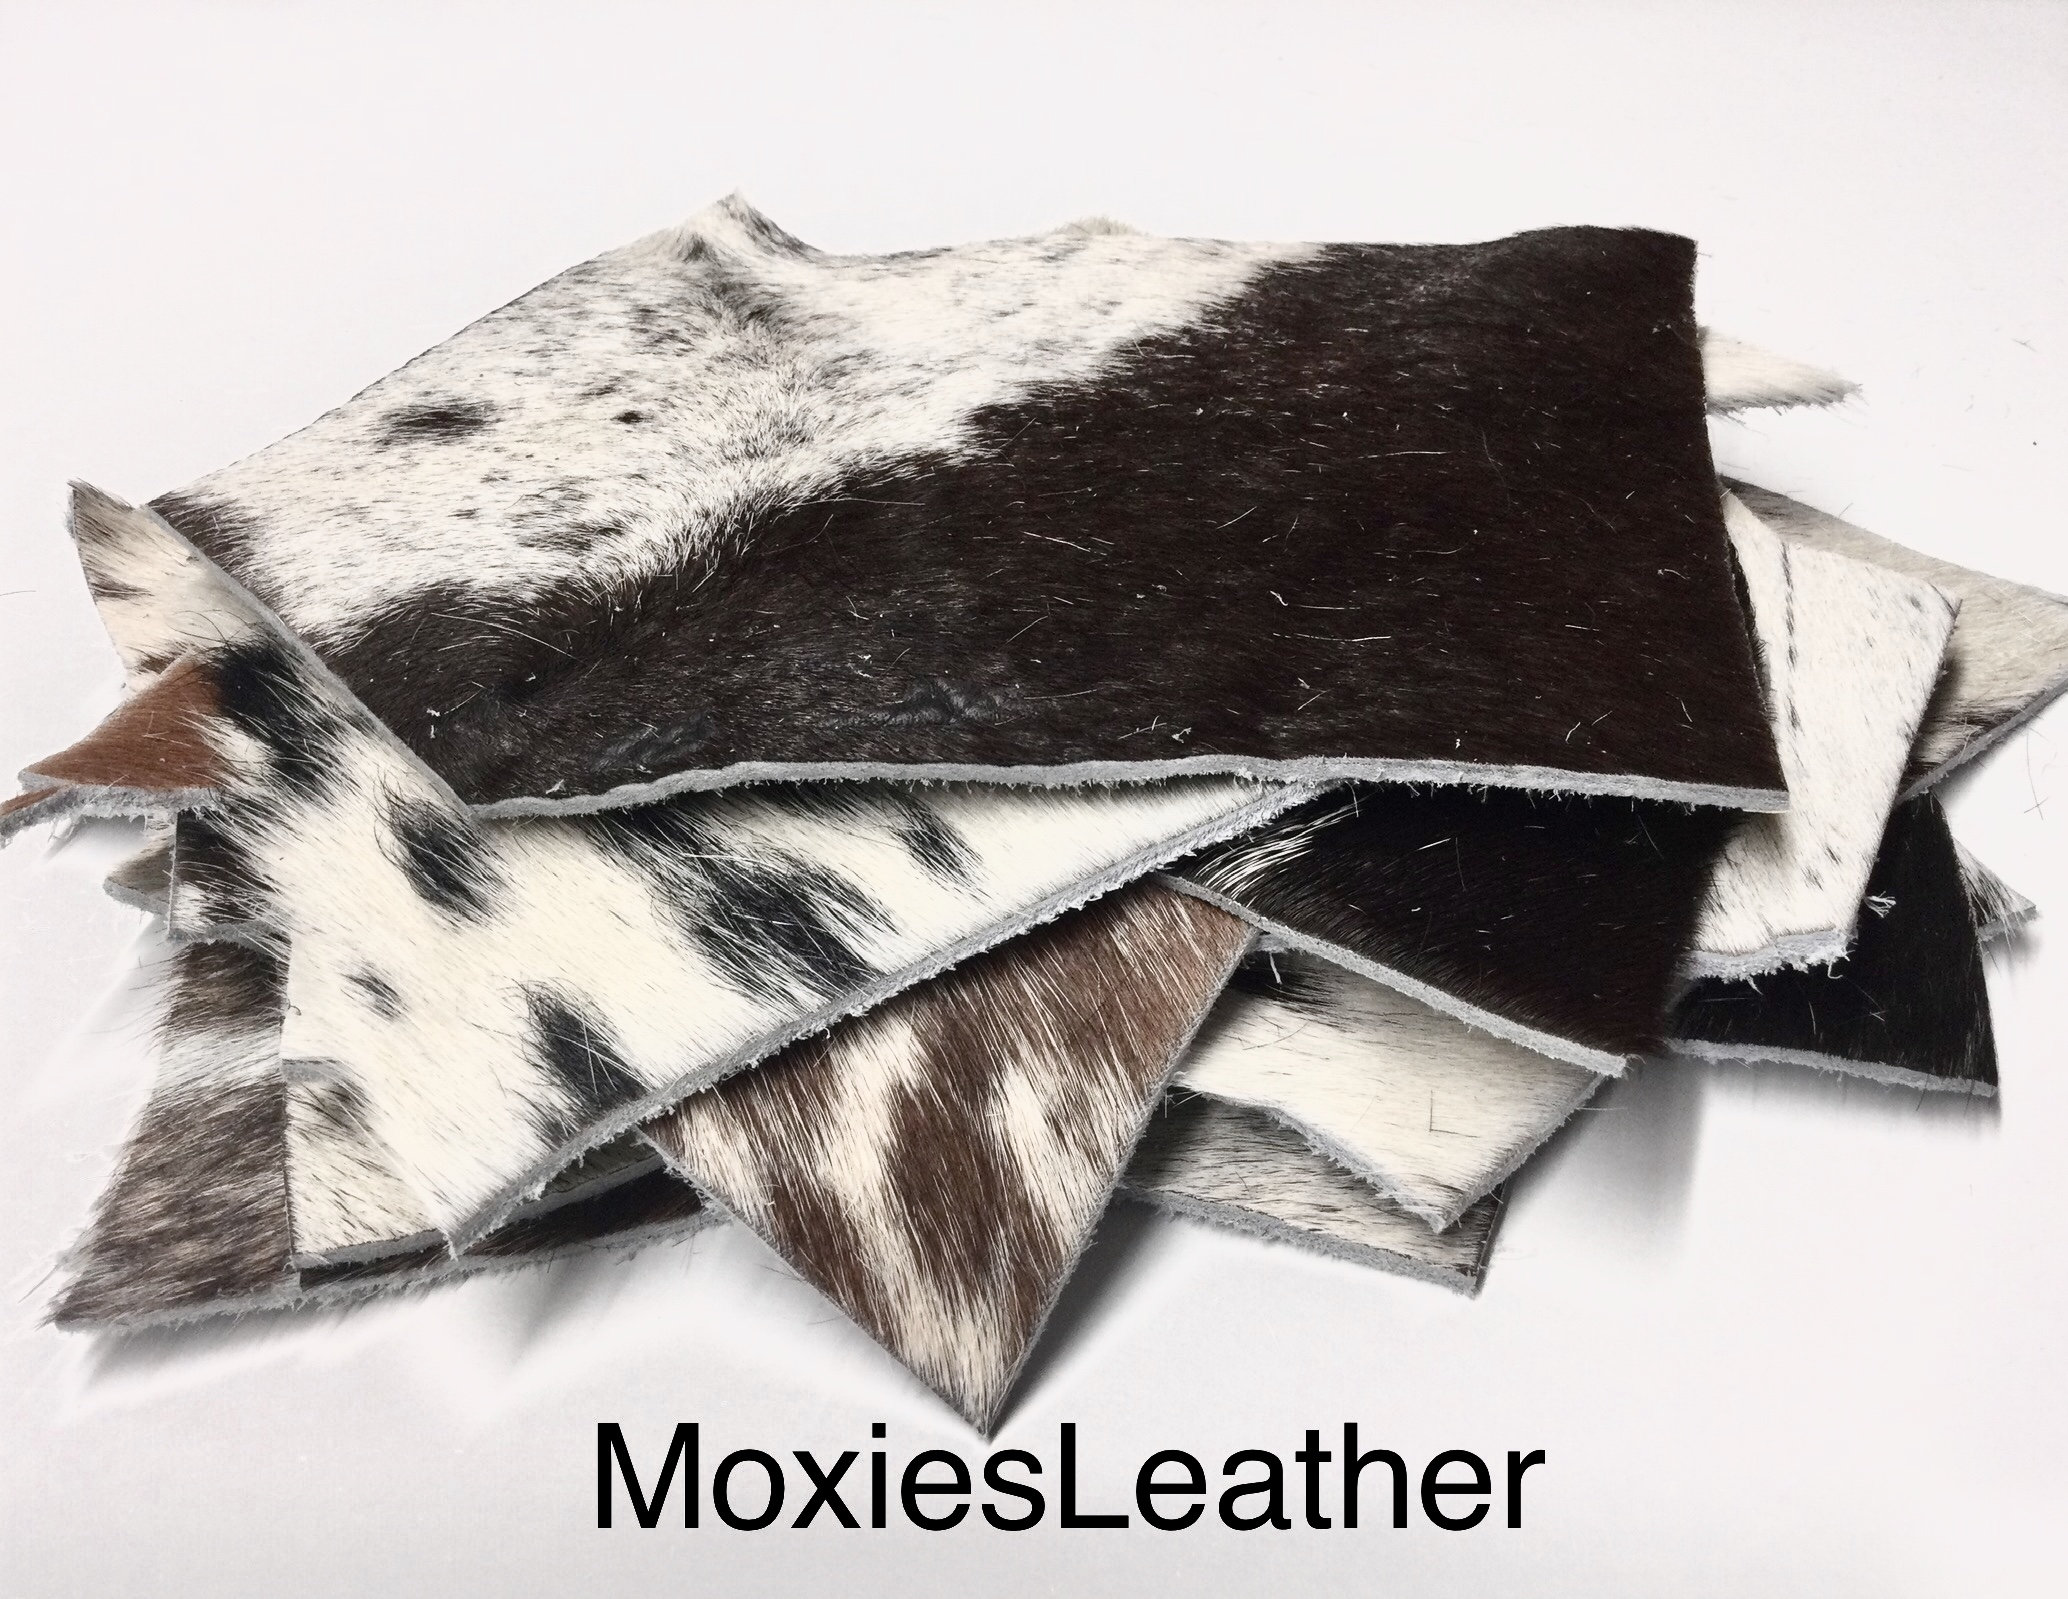 1 lb large genuine leather scraps pieces, jewelry supplies material, mix  remnants for crafts